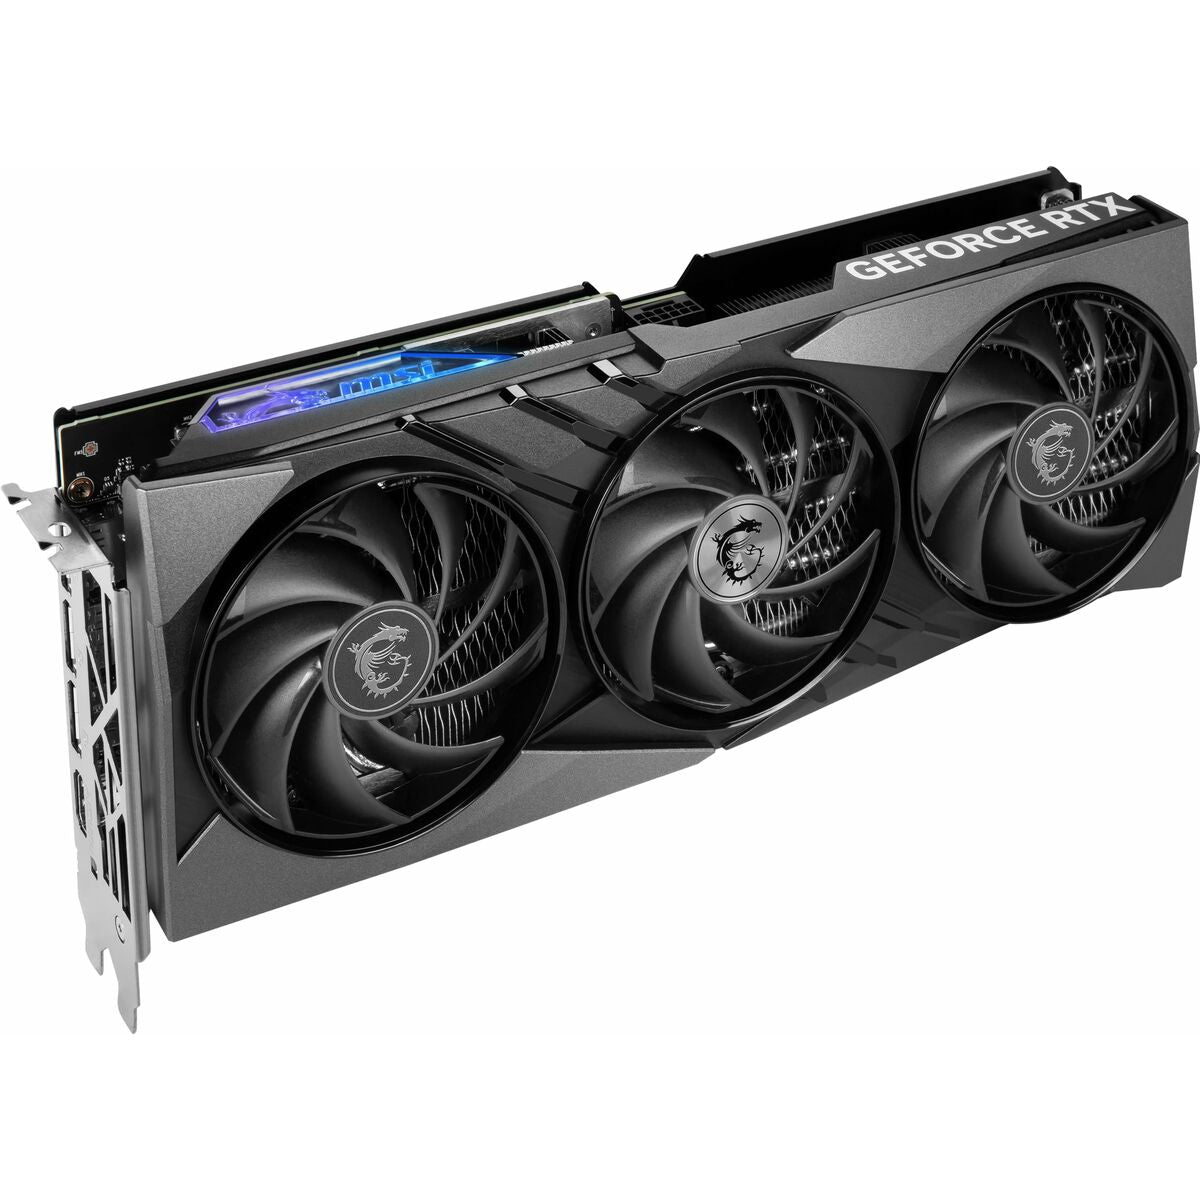 Graphics card MSI GAMING X SLIM Geforce RTX 4060 Ti 12 GB, MSI, Computing, Components, graphics-card-msi-geforce-rtx-4070-ti-geforce-rtx-4070-12-gb-ram, Brand_MSI, category-reference-2609, category-reference-2803, category-reference-2812, category-reference-t-19685, category-reference-t-19912, category-reference-t-21360, category-reference-t-25665, computers / components, Condition_NEW, Price_900 - 1000, Teleworking, RiotNook